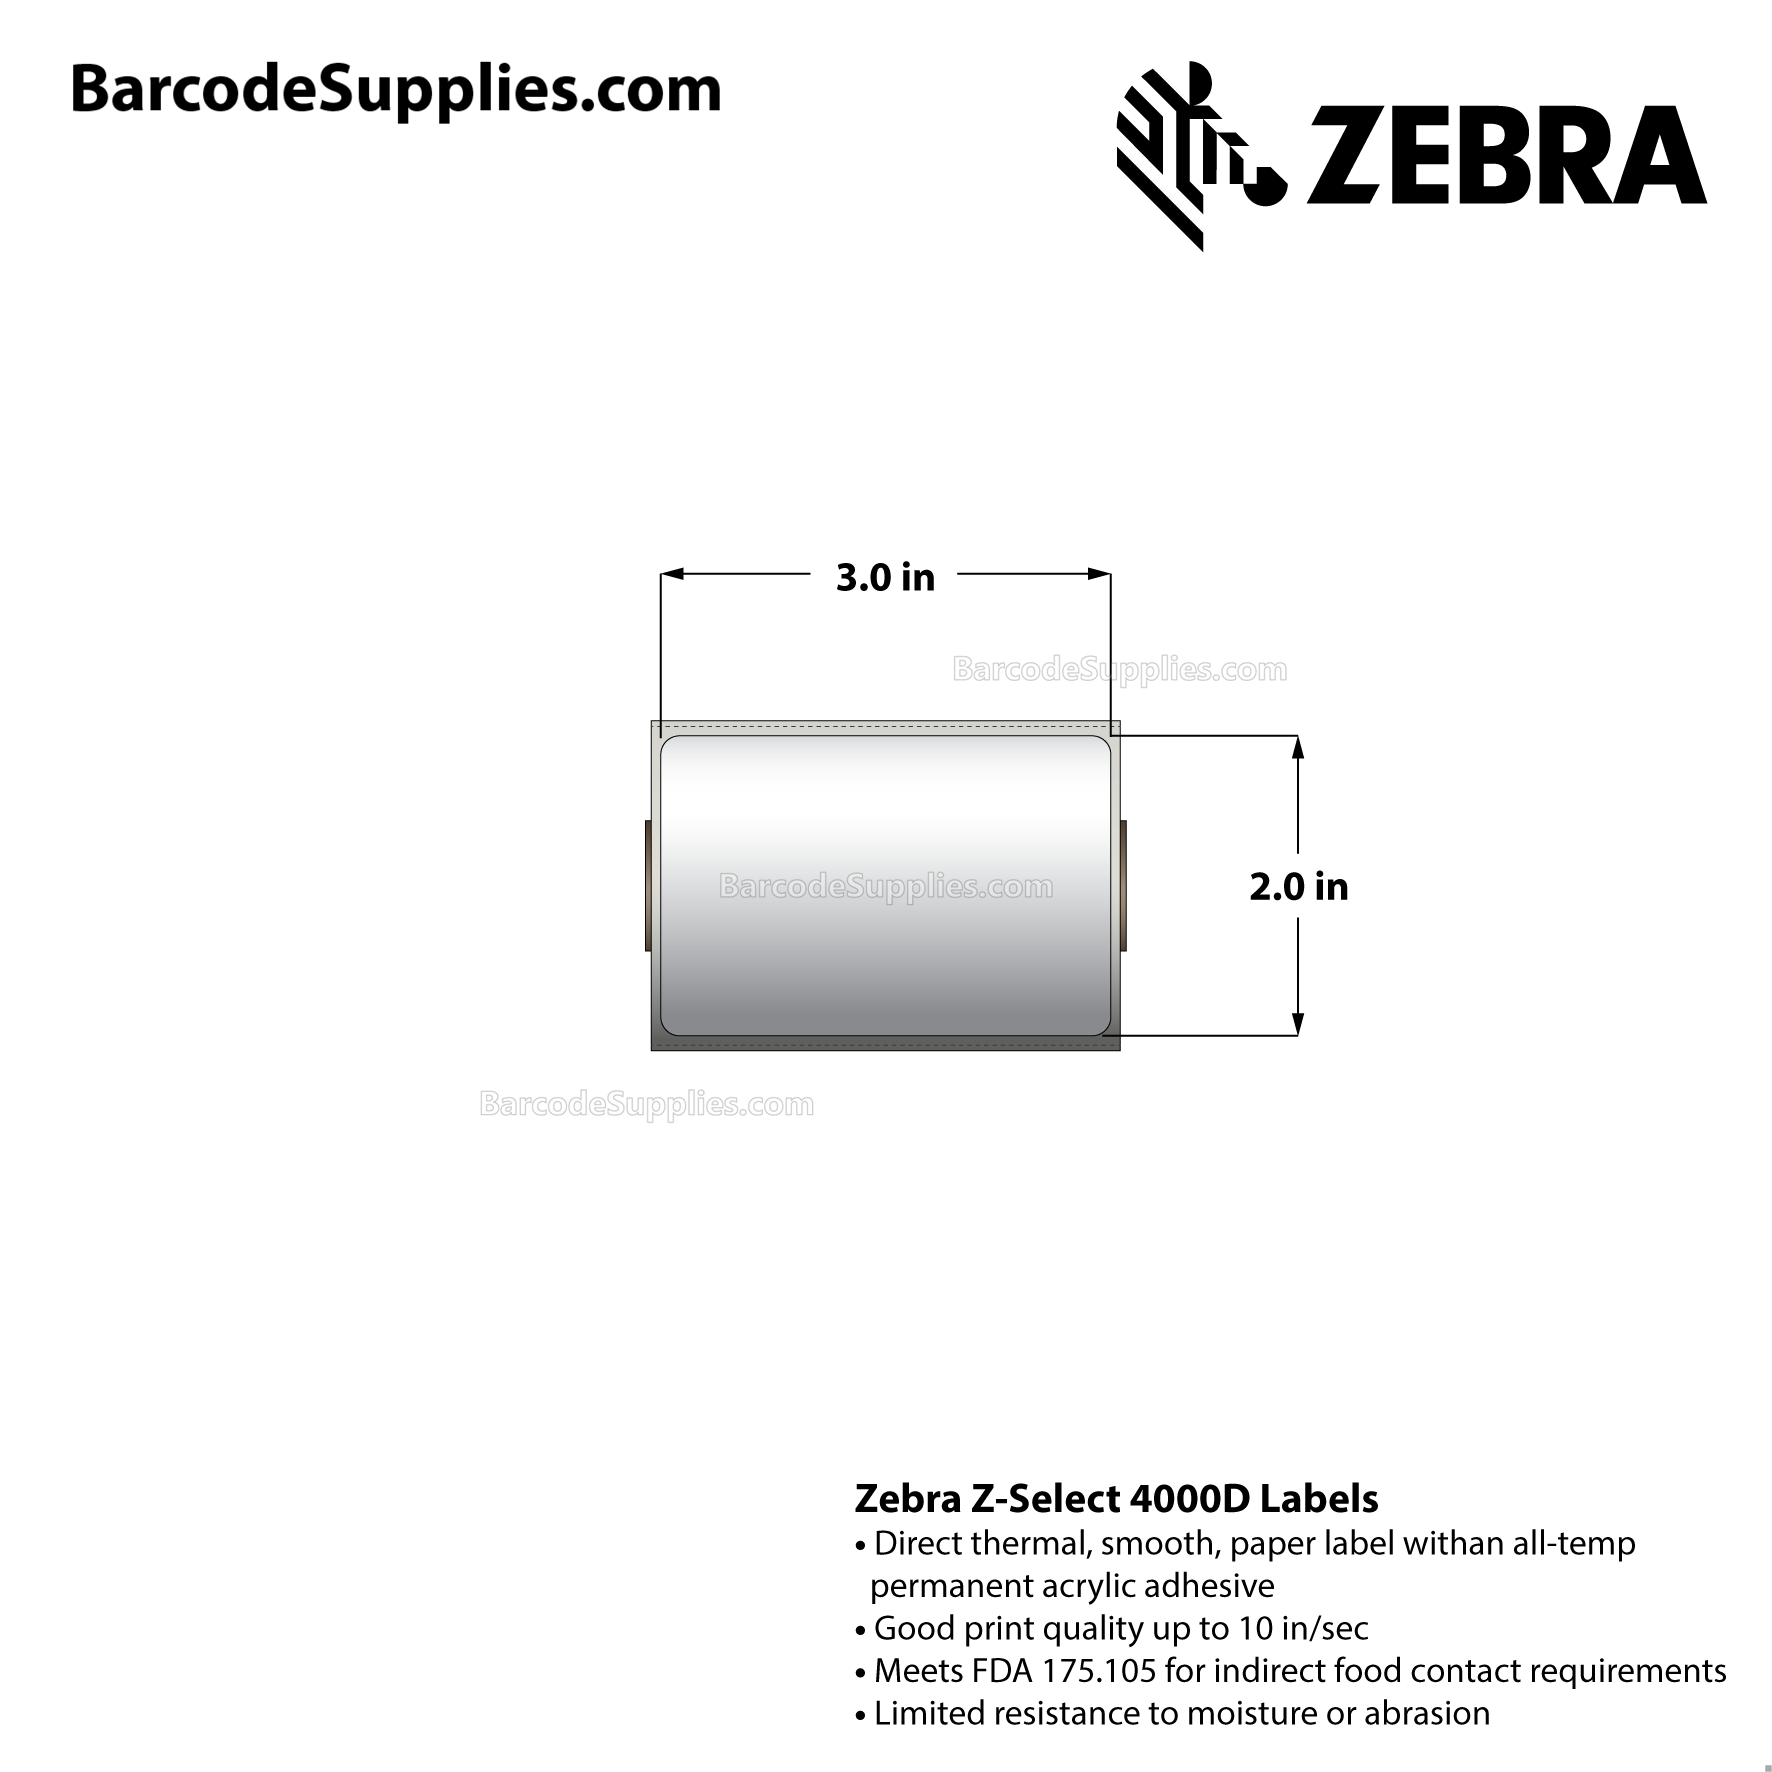 Products 3 x 2 Direct Thermal White Z-Select 4000D Labels With All-Temp Adhesive - Perforated - 210 Labels Per Roll - Carton Of 36 Rolls - 7560 Labels Total - MPN: 10001962